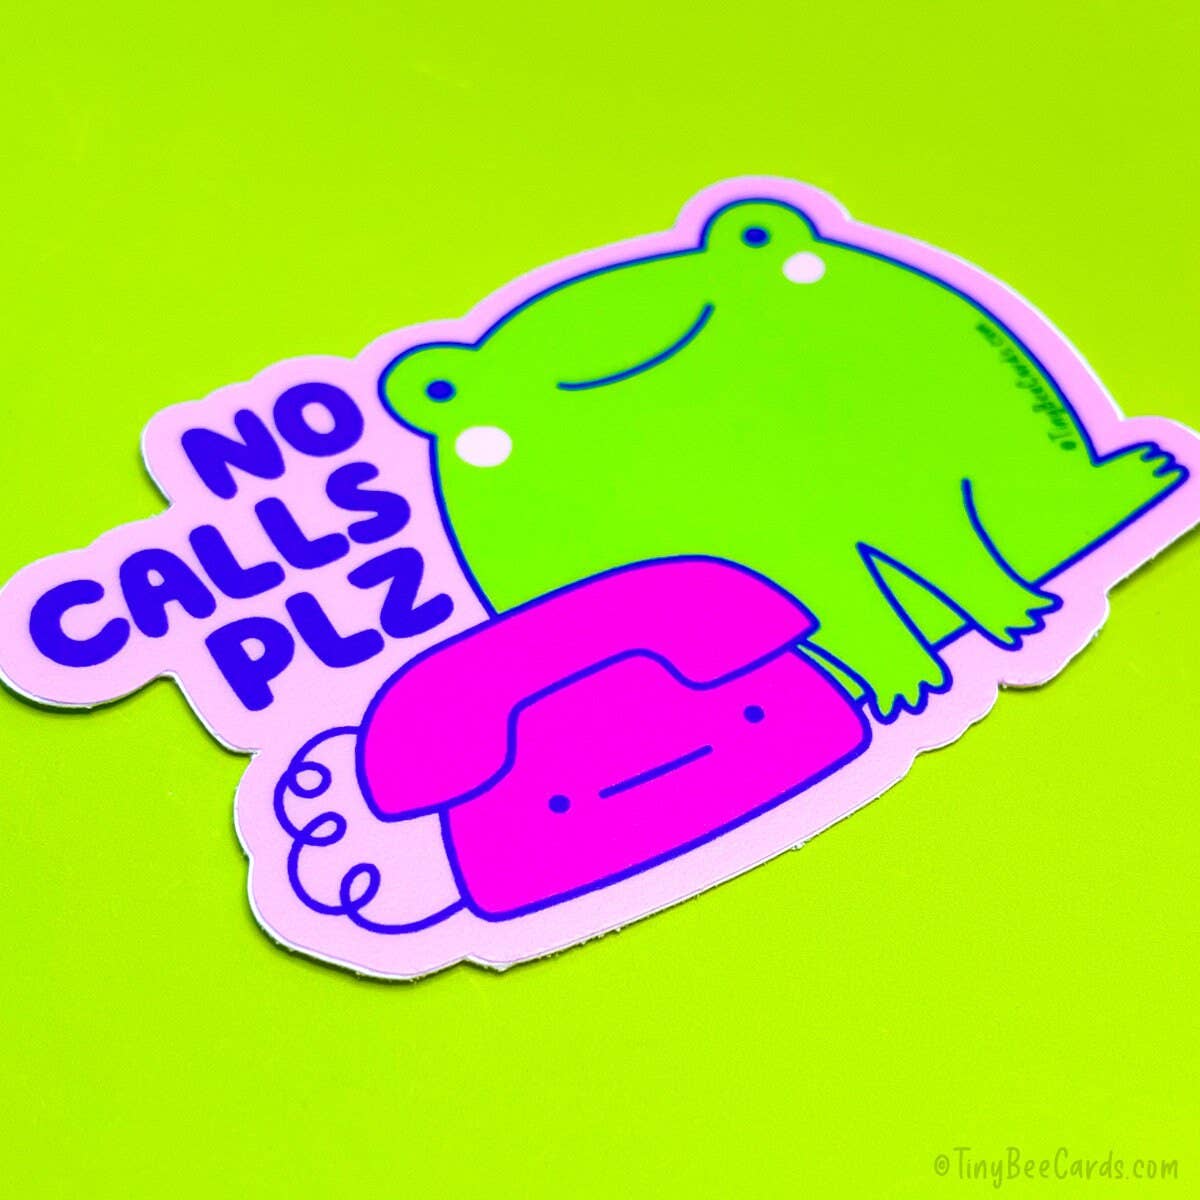 Image of sticker with pink background and image of green frog and hot pink telephone with blue text says, "No calls plz". 